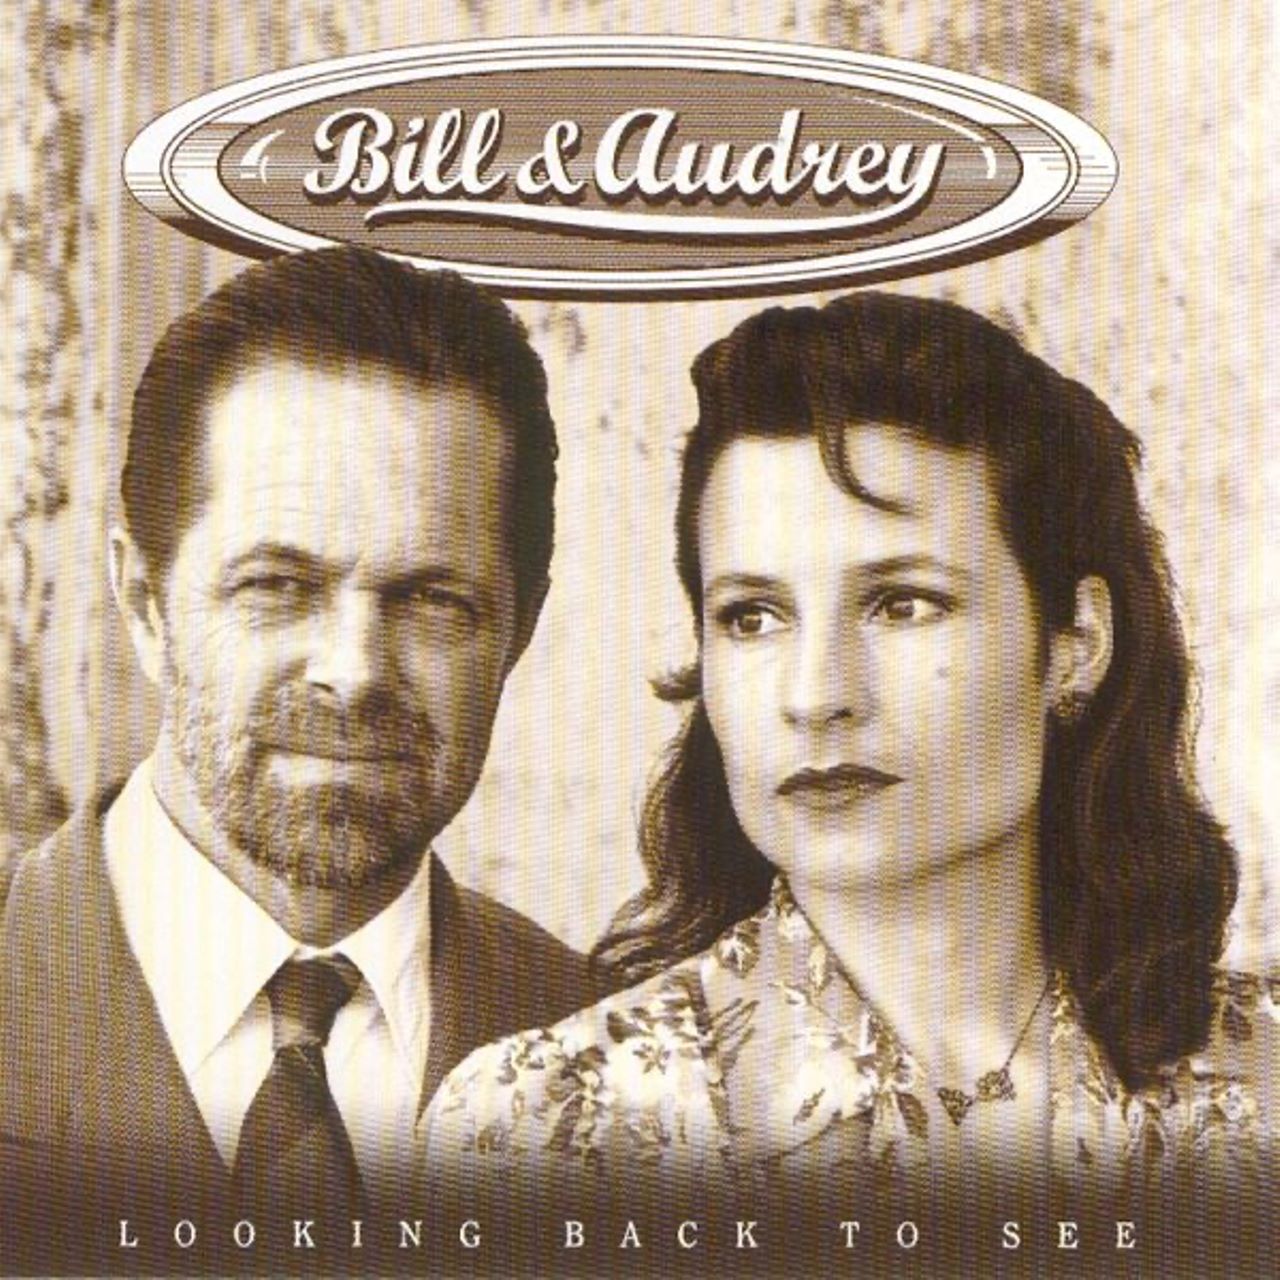 Bill & Audrey - Looking Back To See cover album